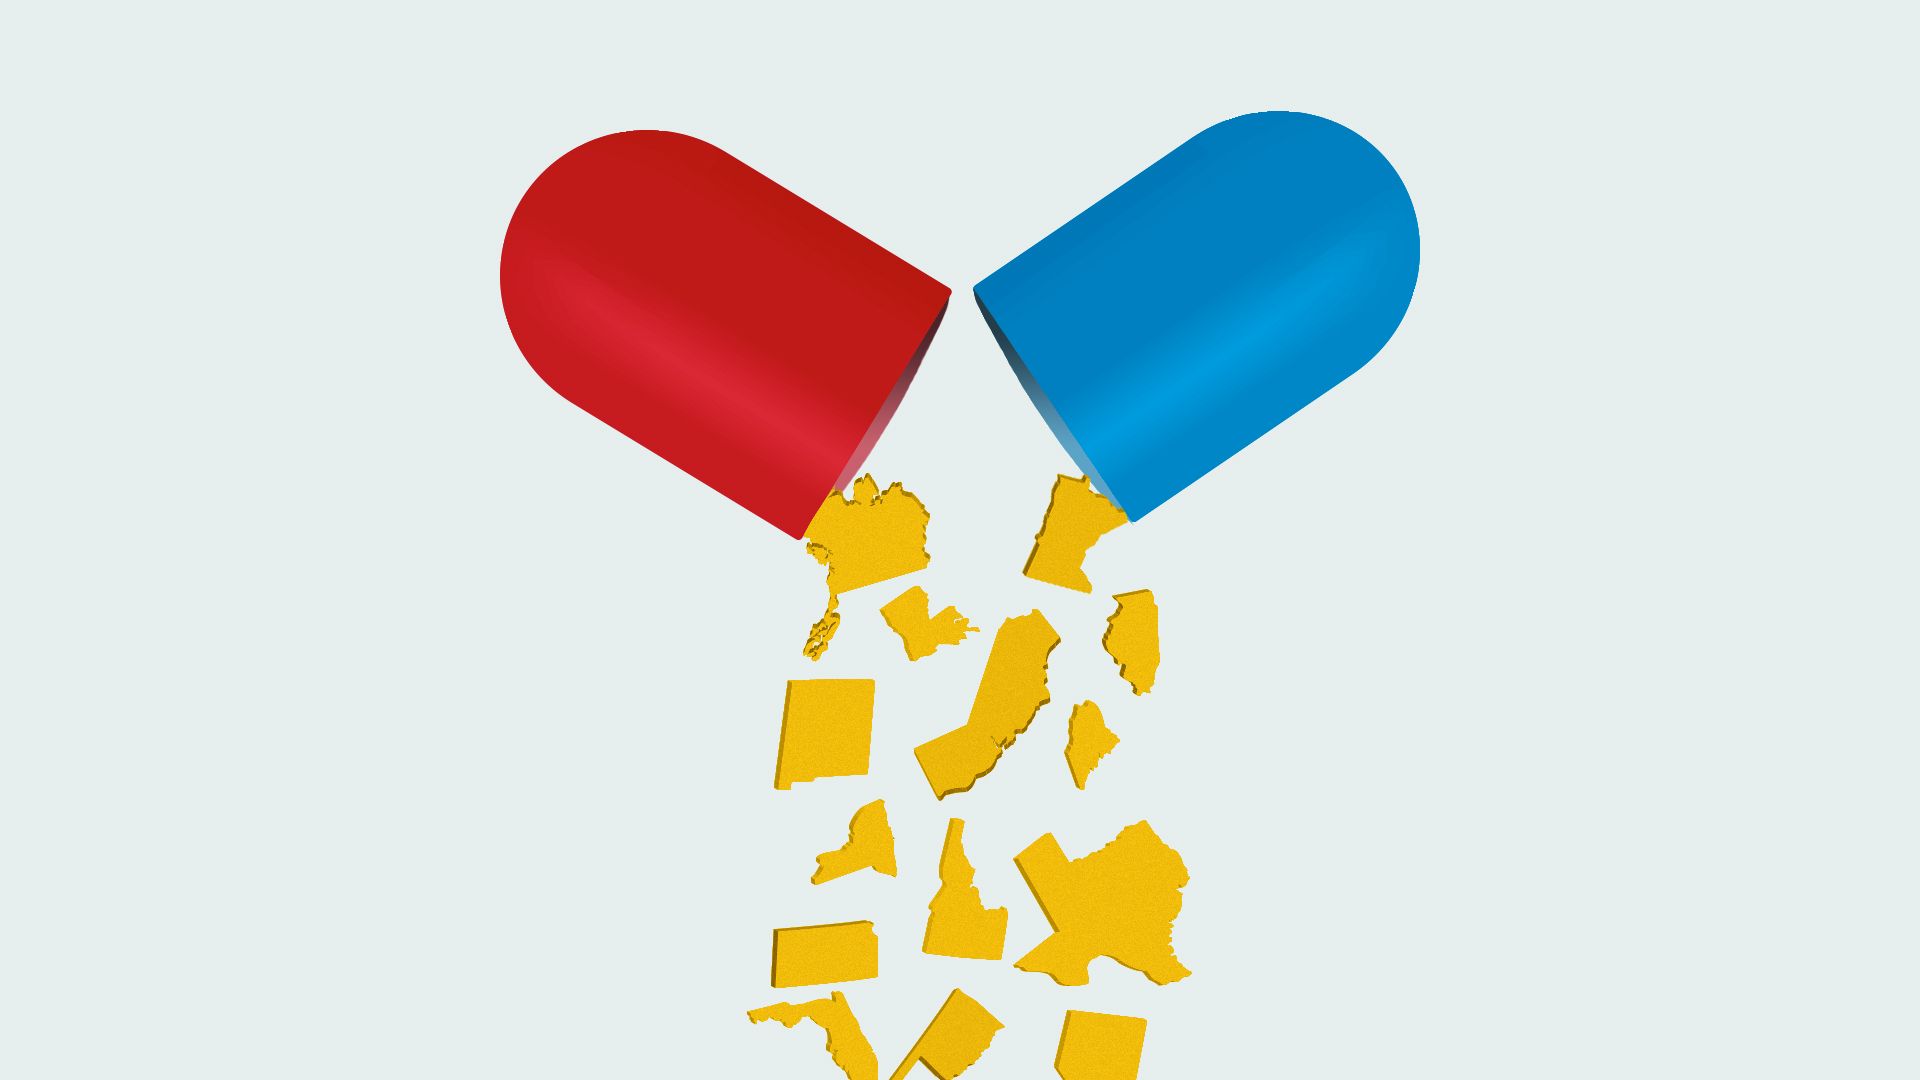 Illustration of a pills capsule opening with state-shaped pills falling out.